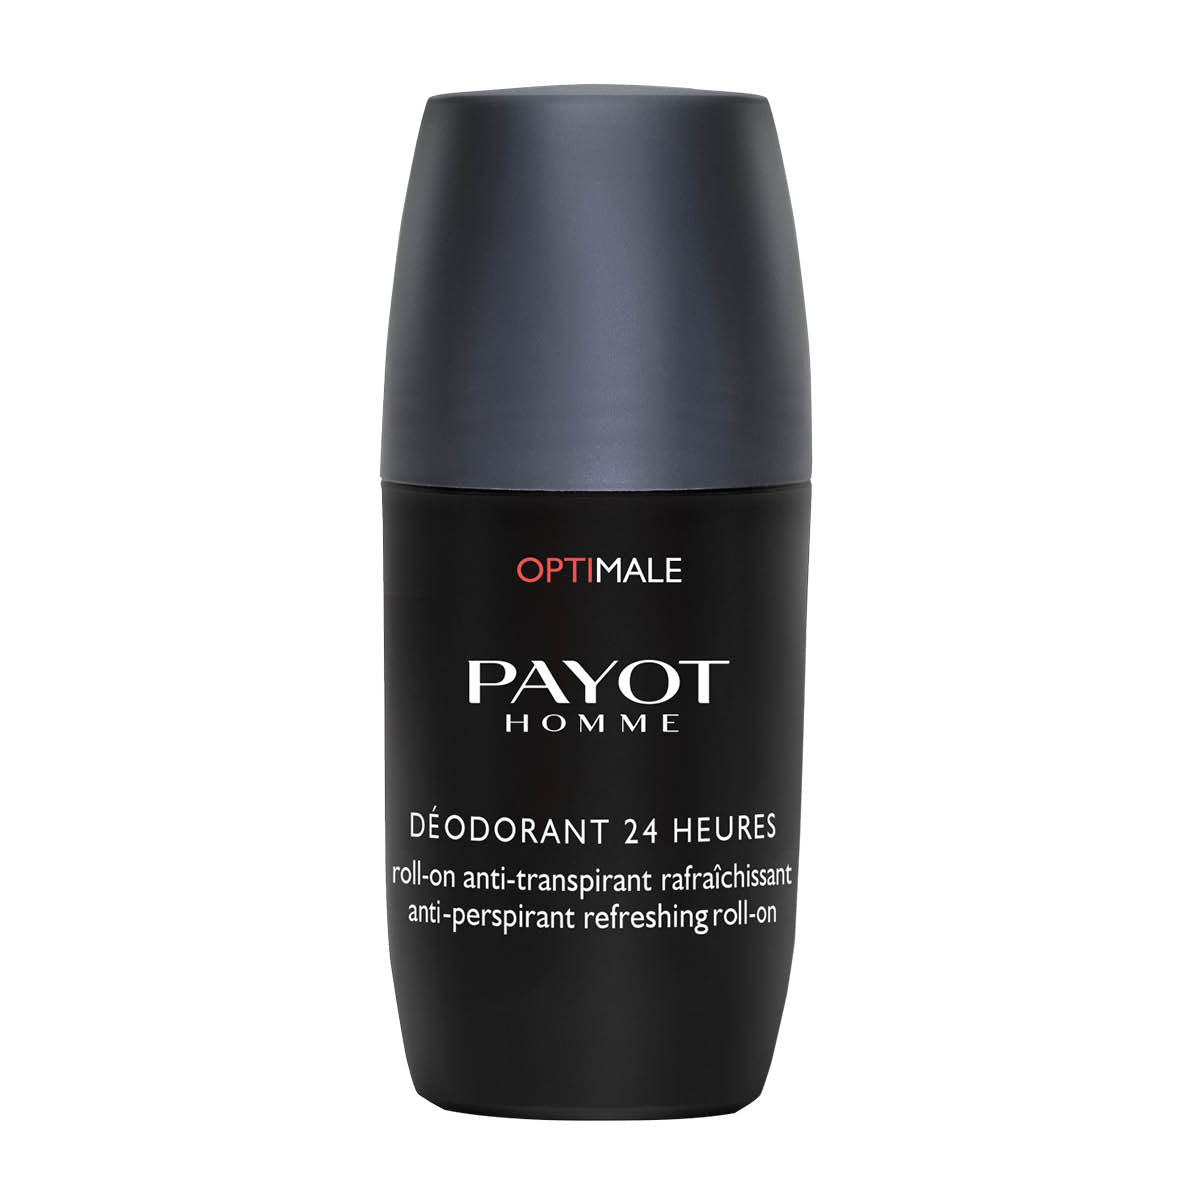 Payot Optimale 24 Hour Roll-on Deodorant 75ml